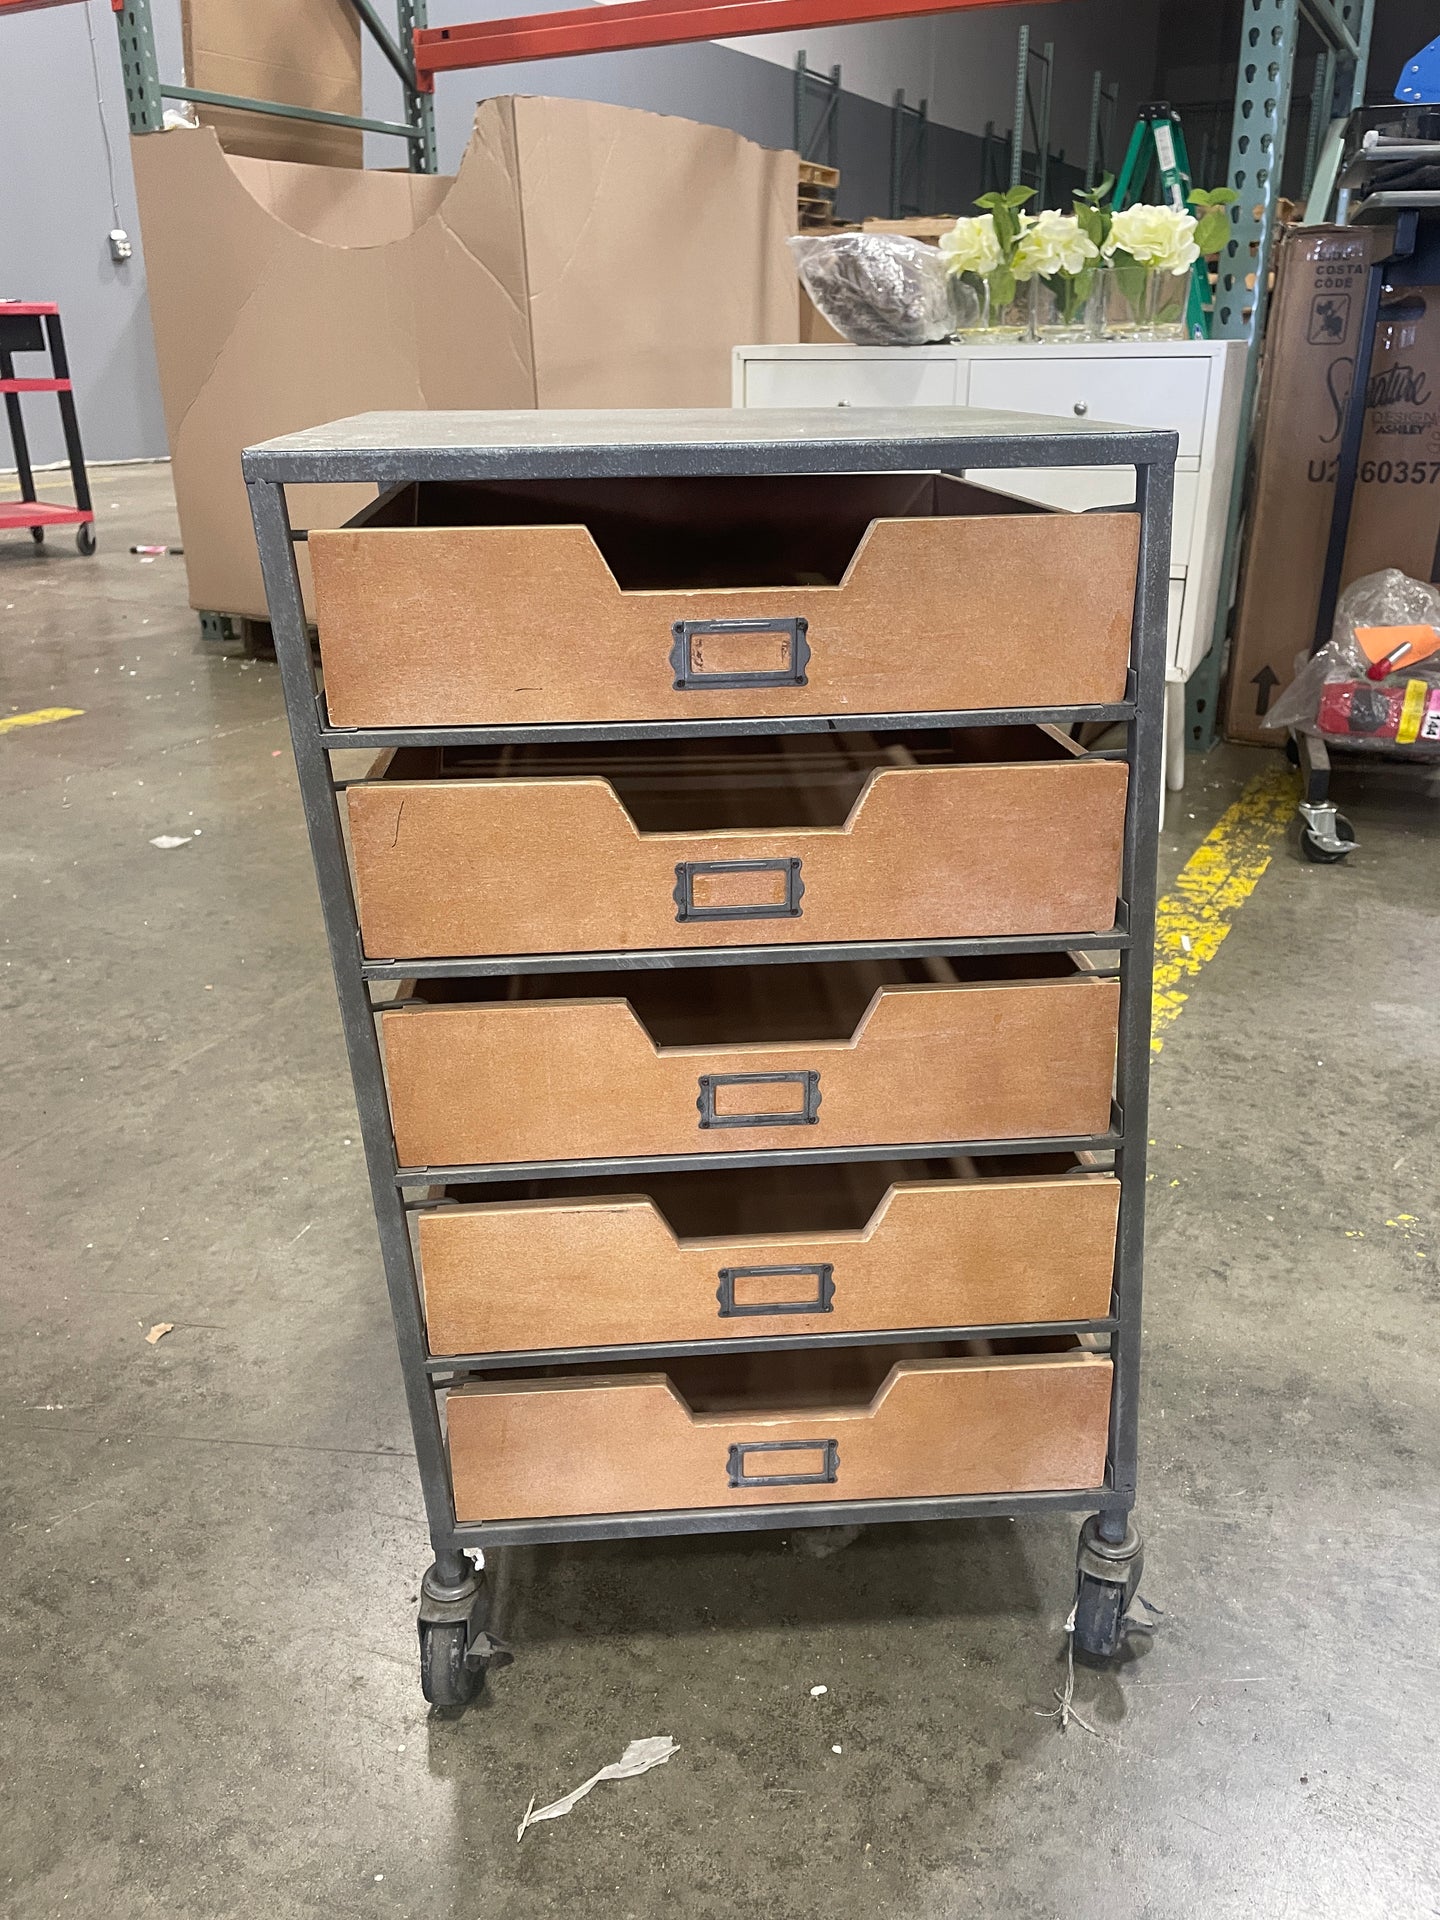 Slightly Crooked 5 Drawer Rolling Cart Final Sale pickup by 9/6